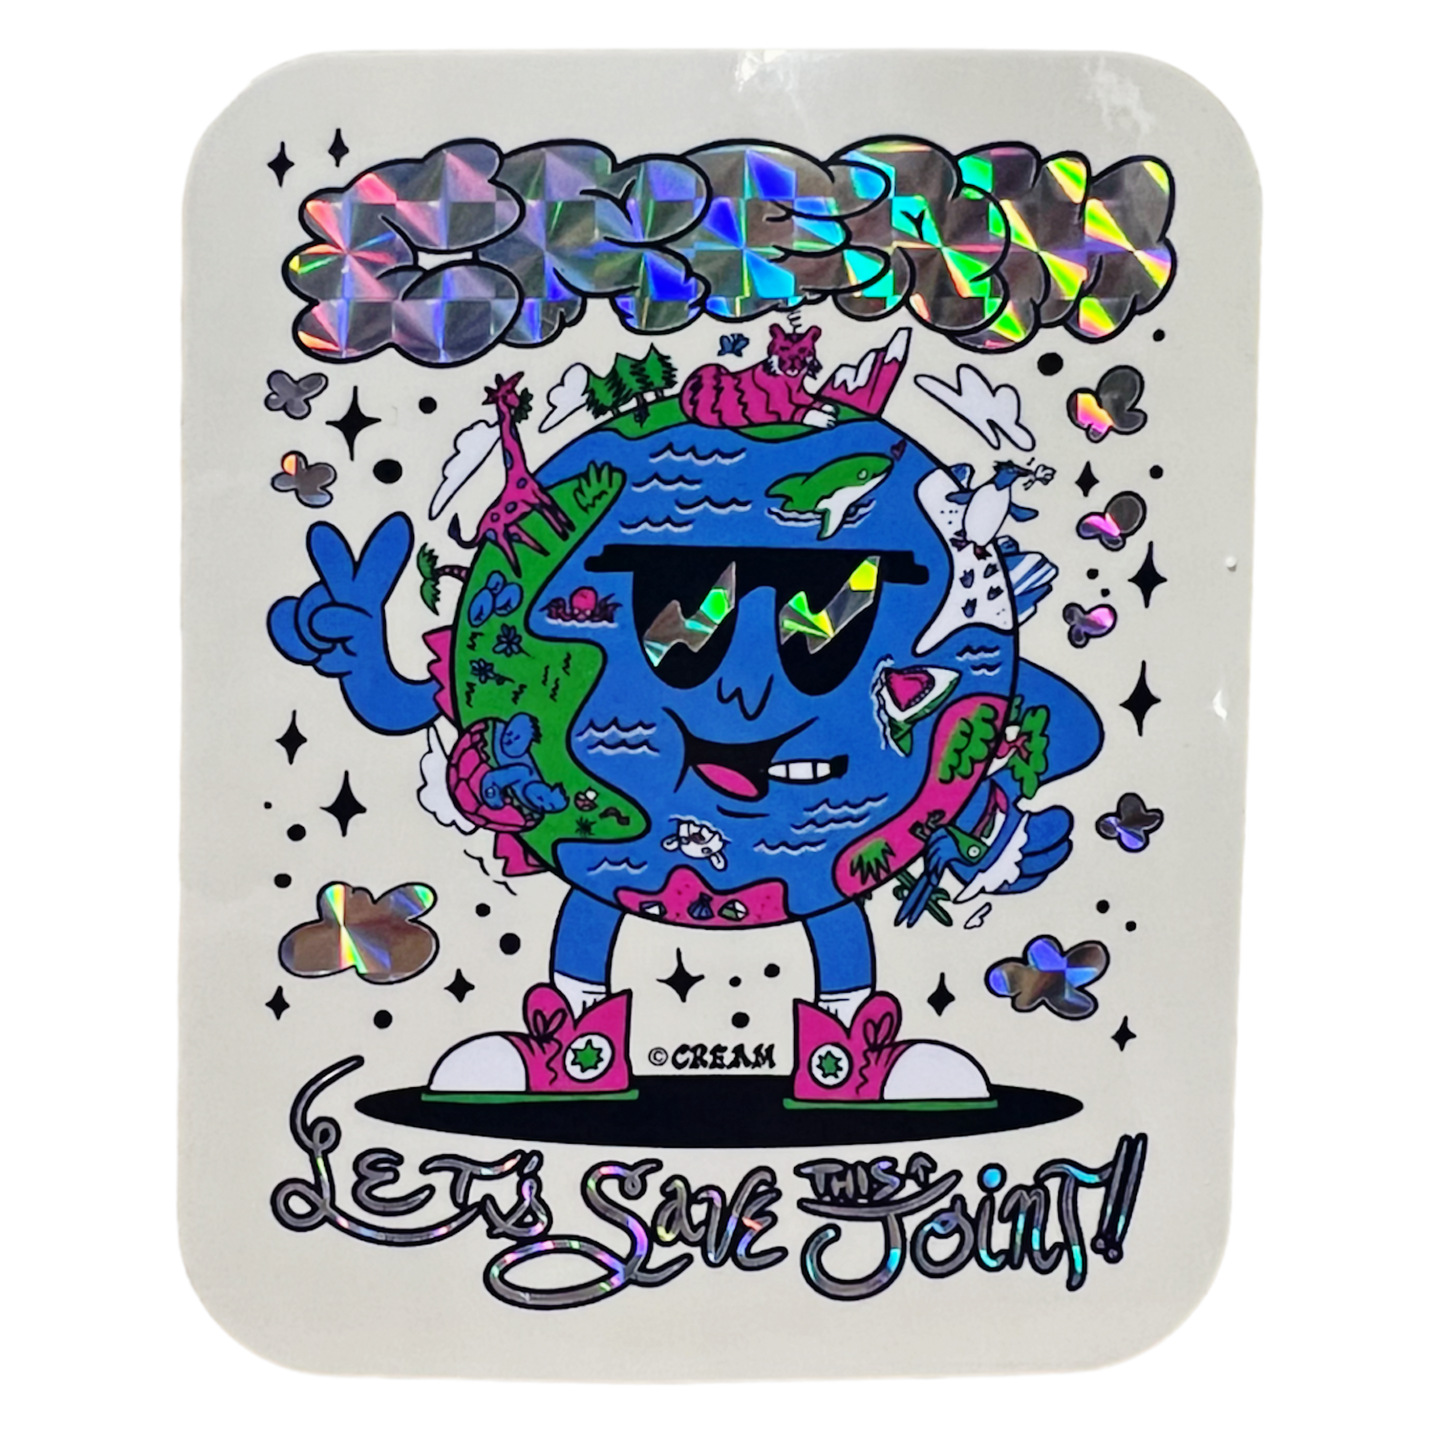 "Let's Save This Joint" - 3" Prismatic Sticker